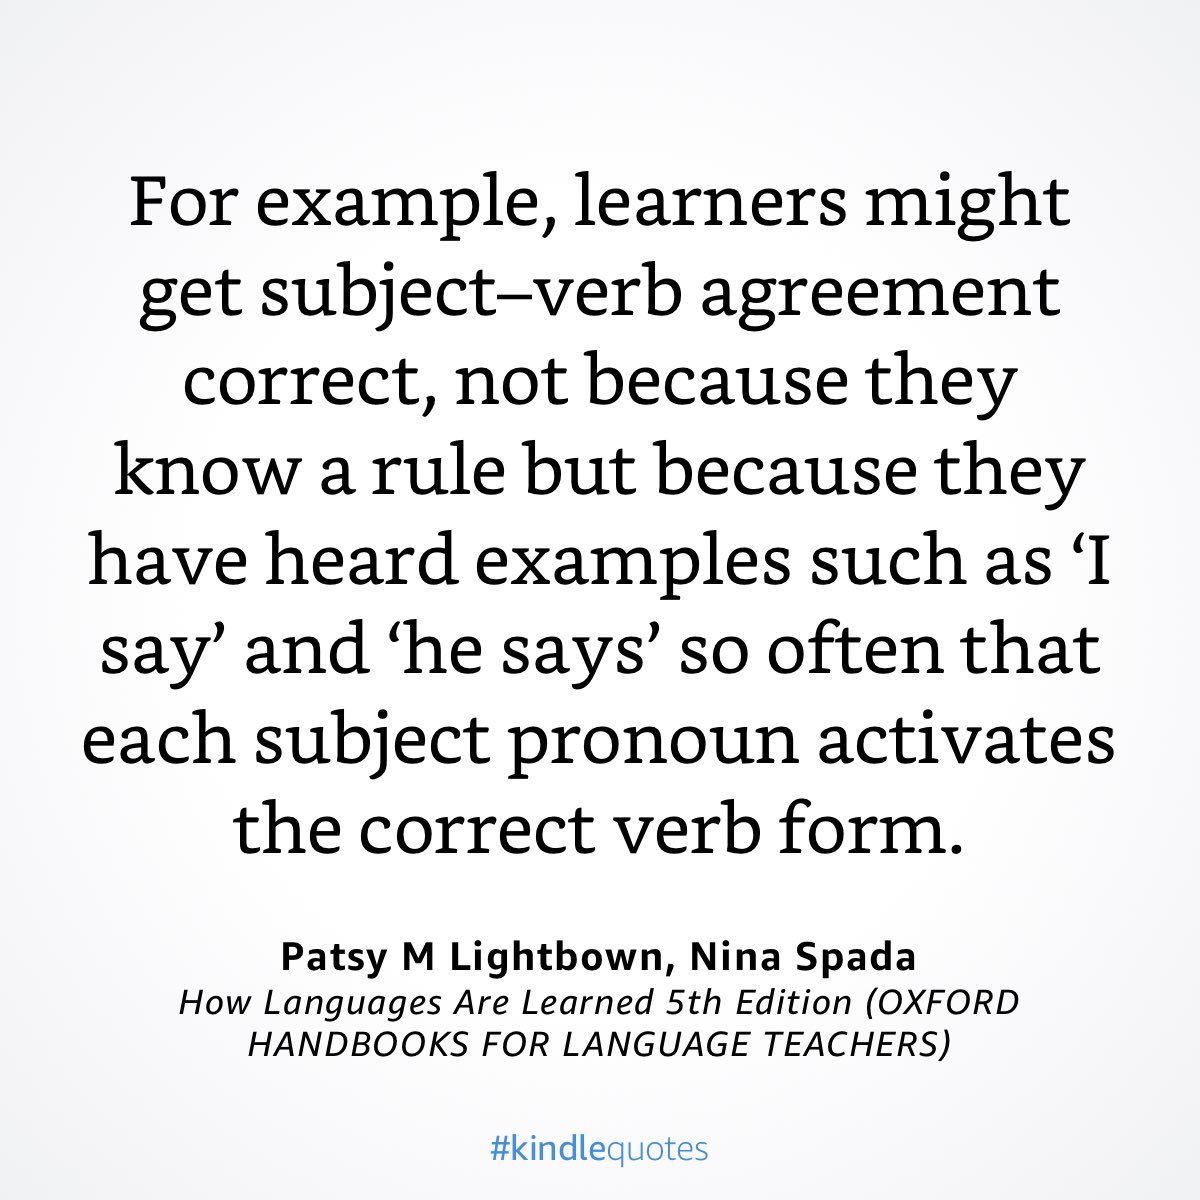 Lightbown and Spada are very experienced at explaining key concepts clearly to readers who don’t read research articles. This point is important. Students become proficient less by ‘knowing rules’ more through just using patterns repeatedly.  amzn.eu/gcIOORX